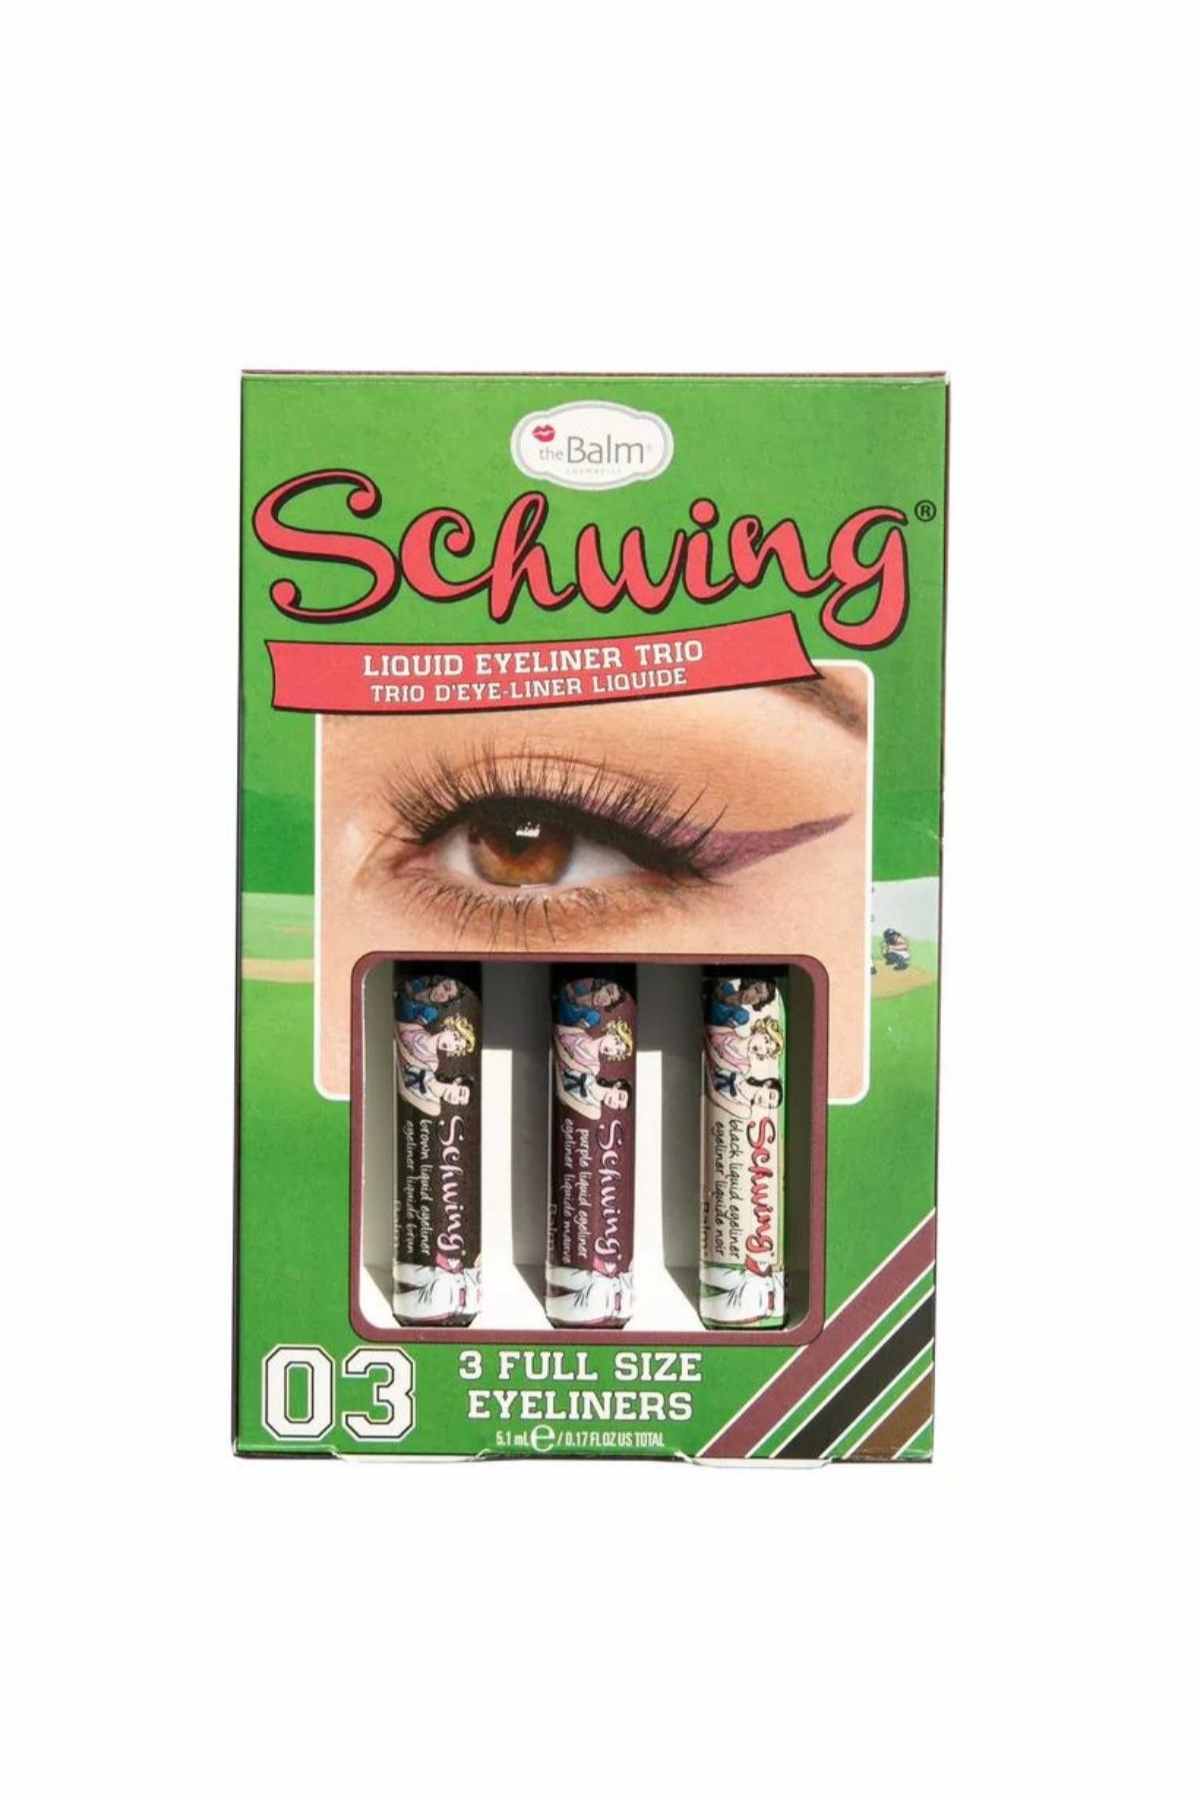 THE Balm Schwing Trio Limited Edition Eyeliner